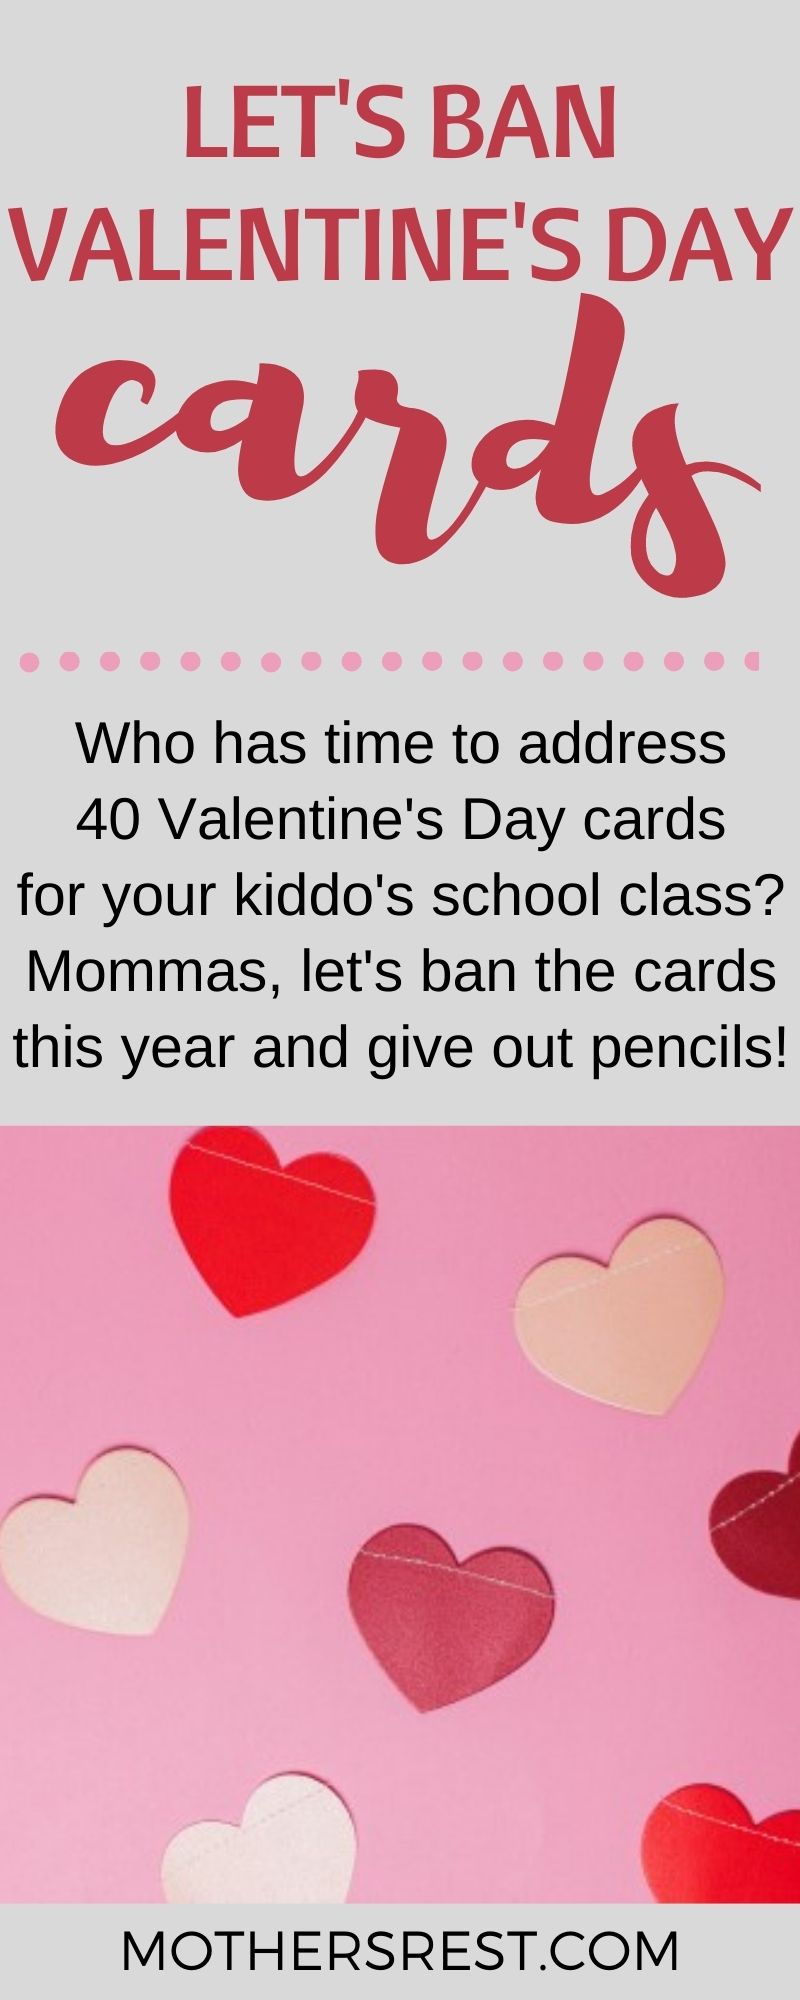 Who has time to address 40 Valentine Day cards for your kiddo for school? Mommas, let us ban the cards this year and give out pencils!